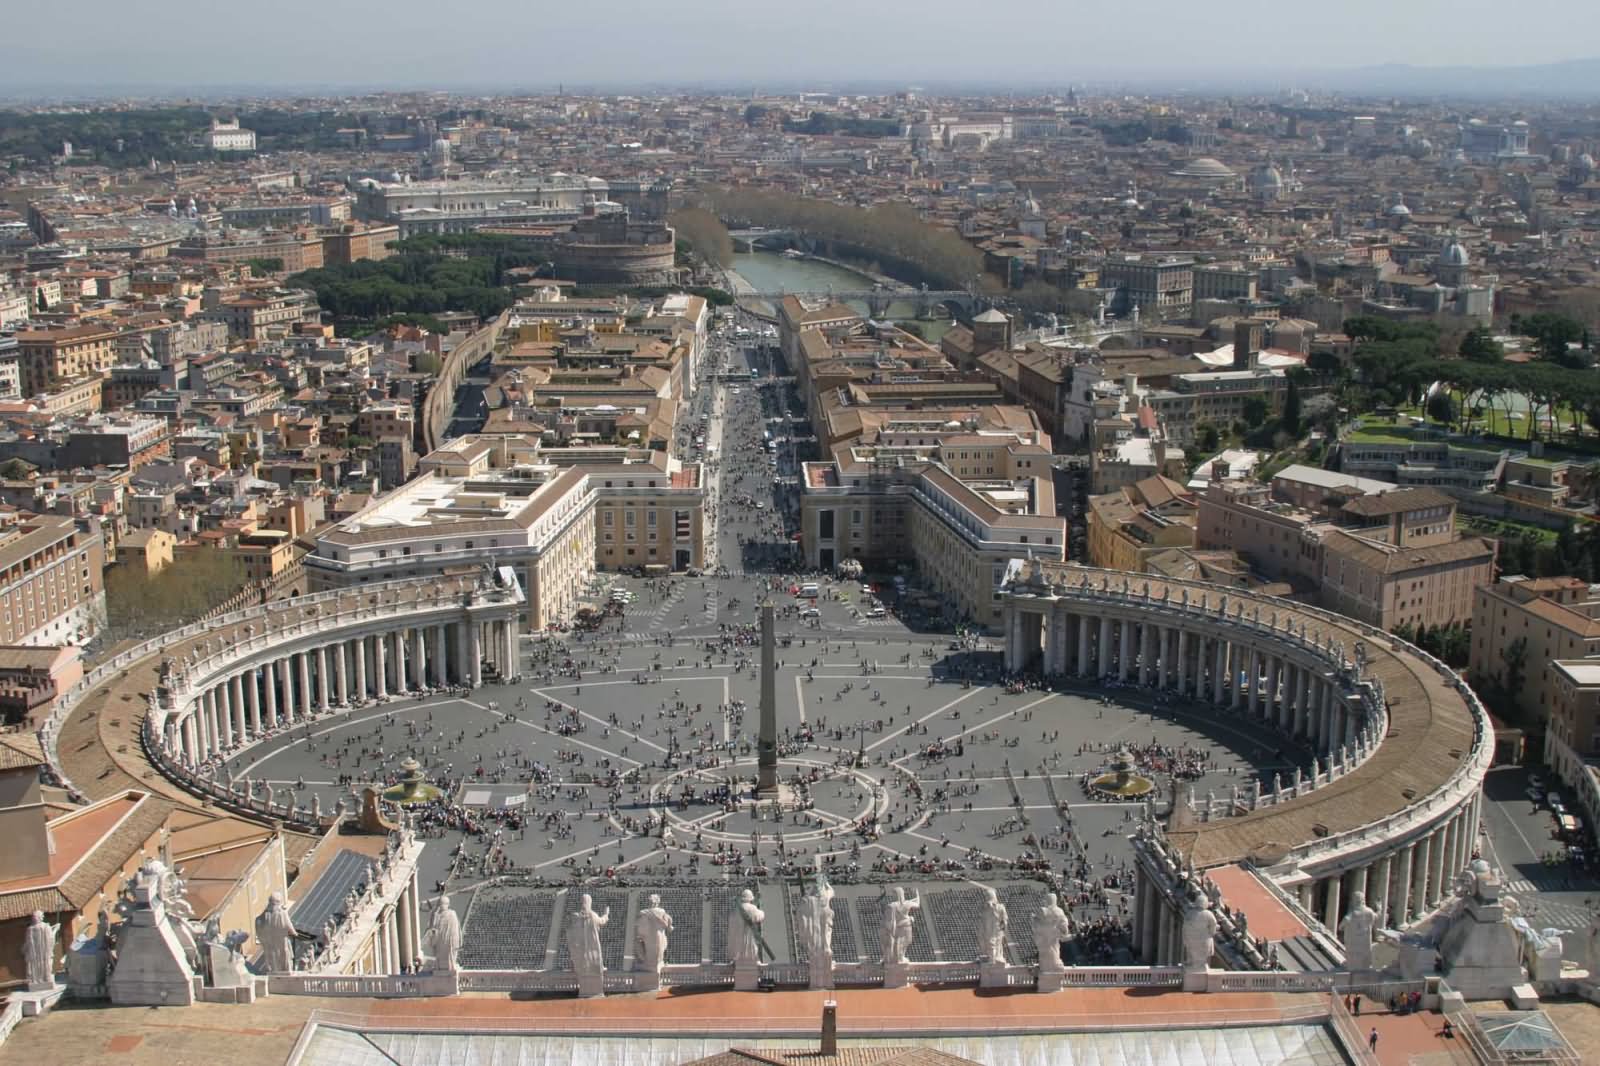 Beautiful St. Peter's Square View From The Dome Of St. Peter's Basilica